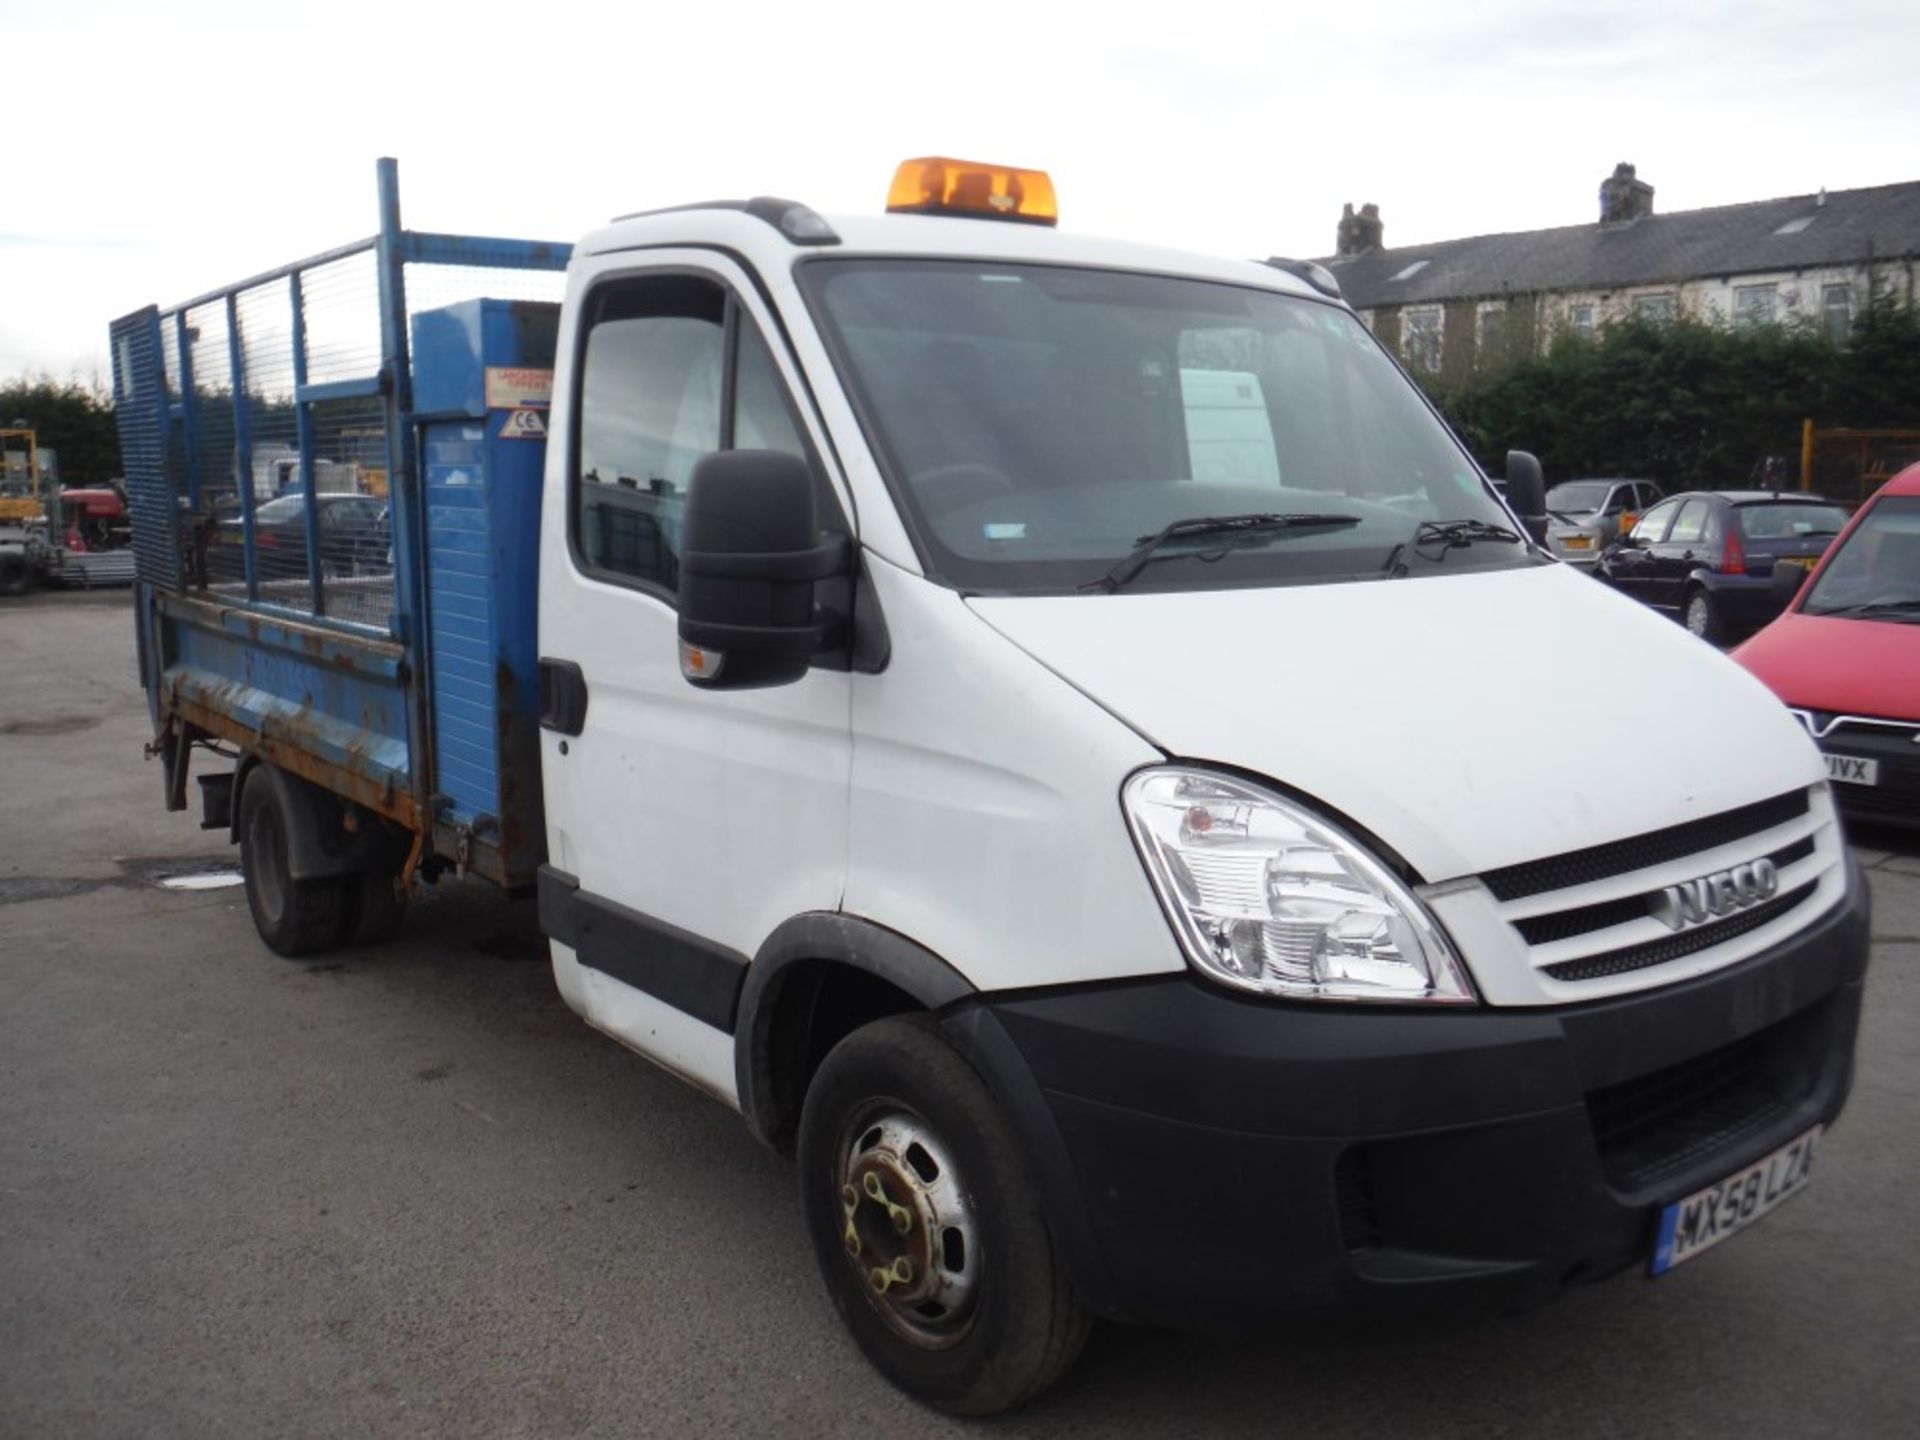 58 reg IVECO DAILY 50C15 CAGED TIPPER, 1ST REG 10/08, TEST 09/15, 117628M, V5 HERE, 1 OWNER FROM NEW